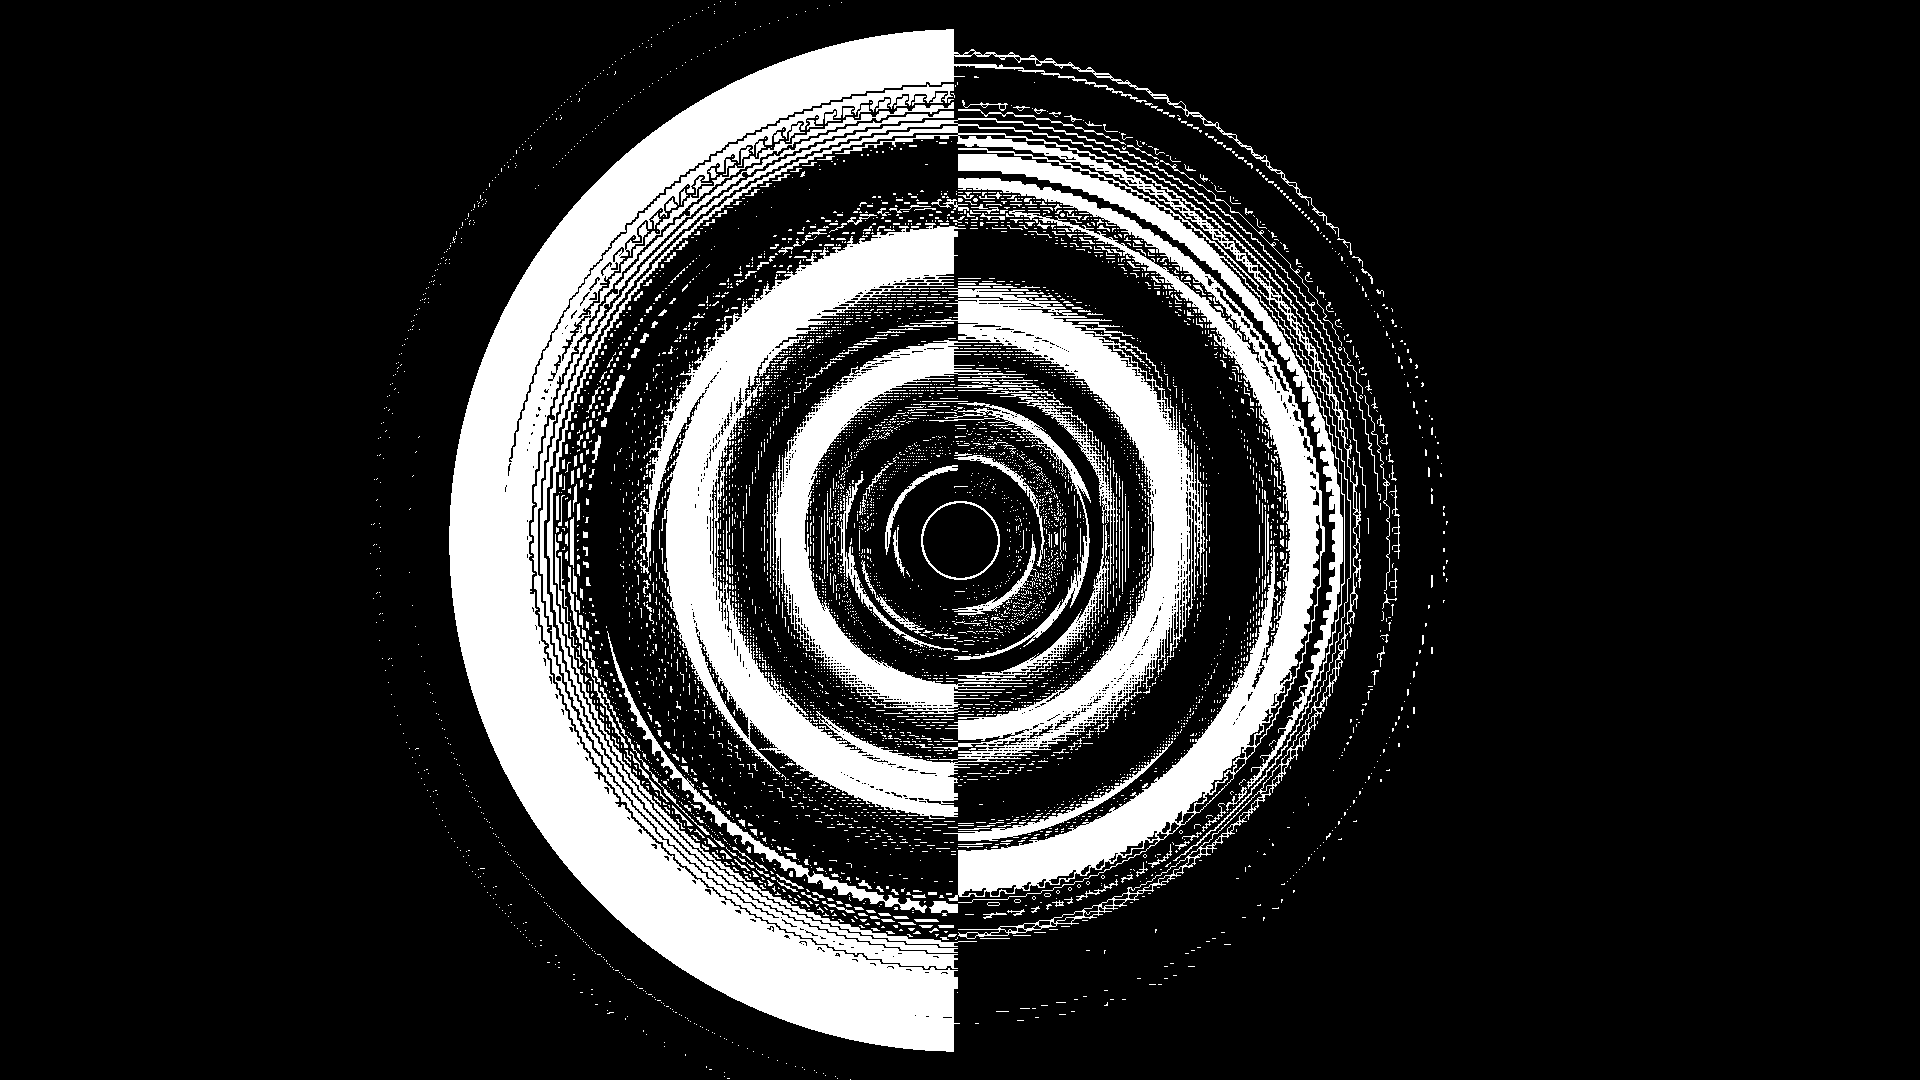 Abstract Black & White HD Wallpaper | Background Image